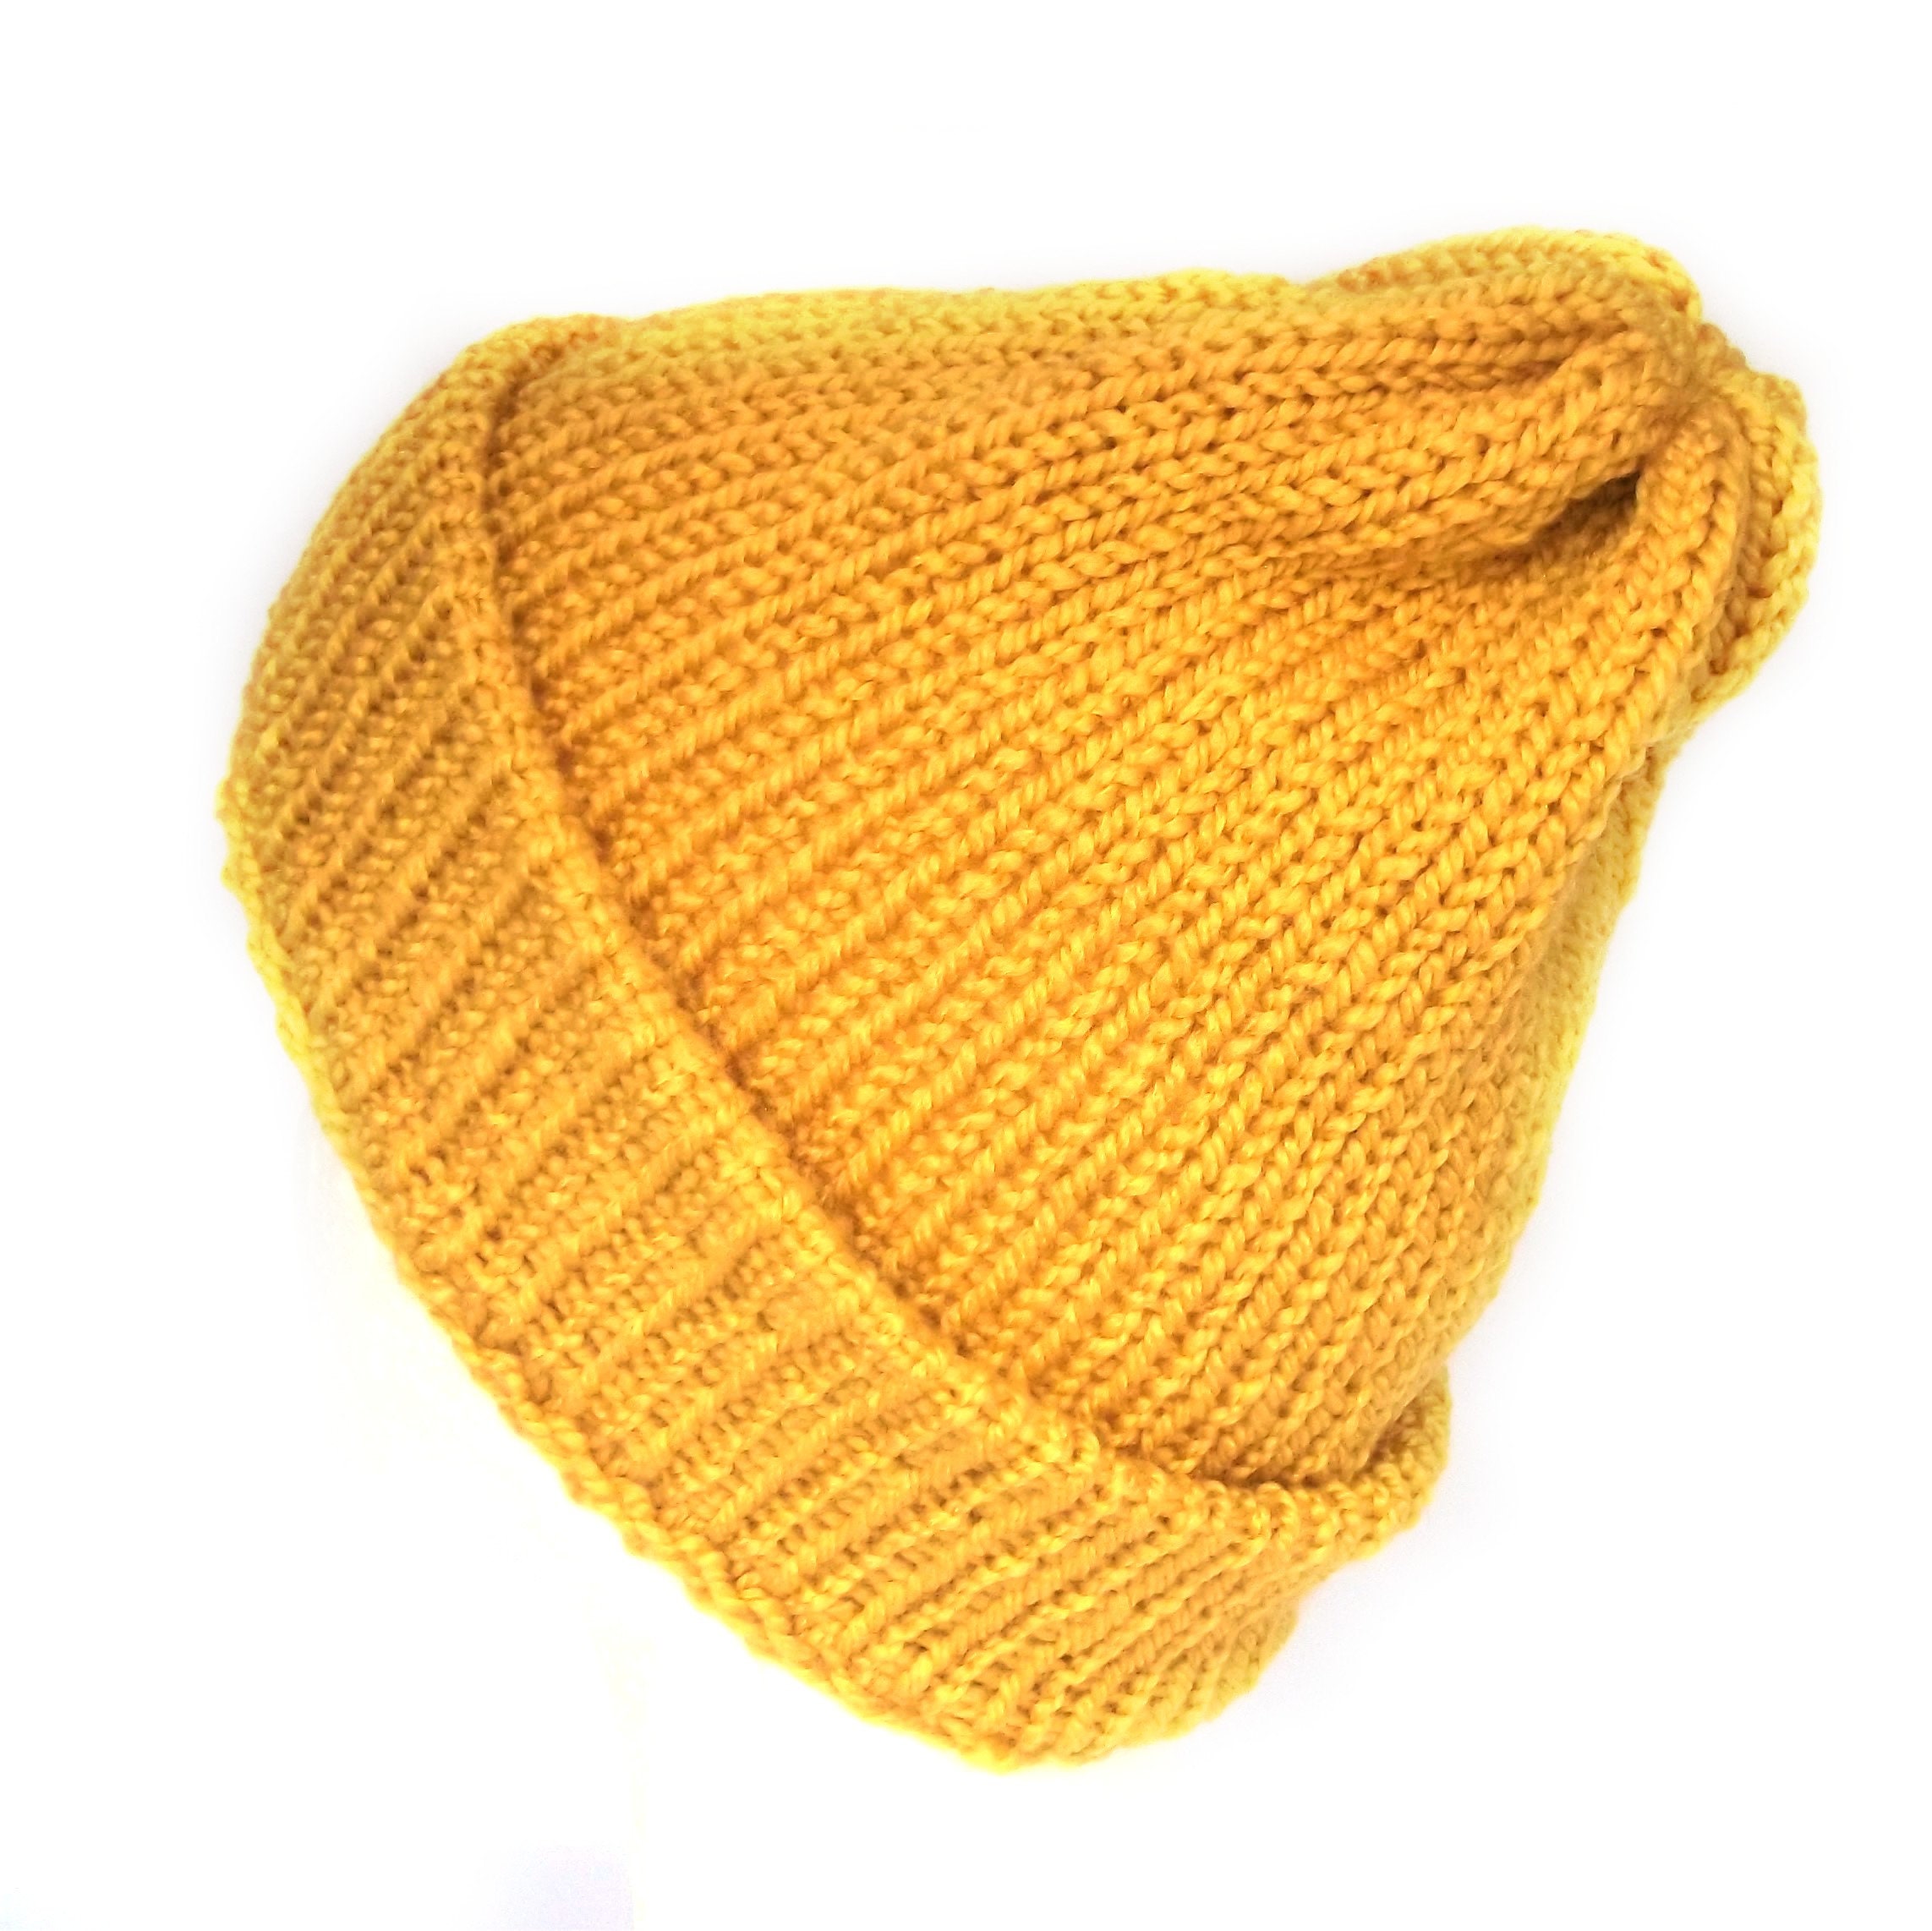 Mustard yellow knitted hat chunky knit hat slouchy beanie | Etsy